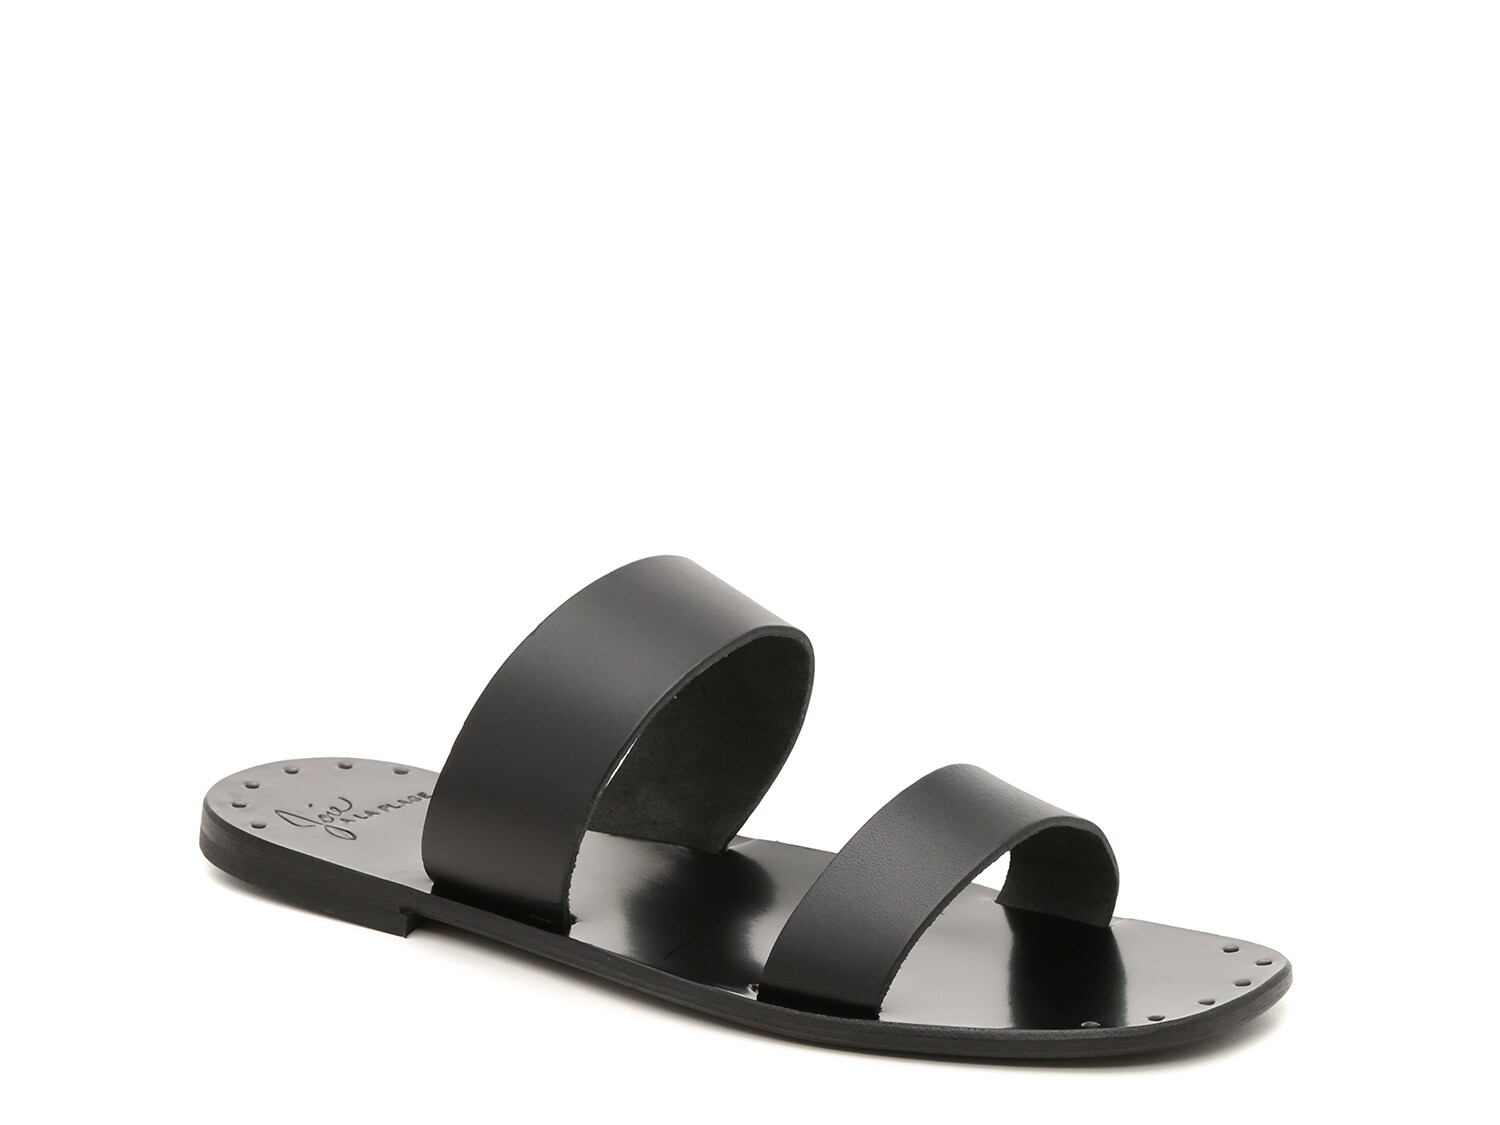 Joie Bannerly Sandal - Free Shipping | DSW